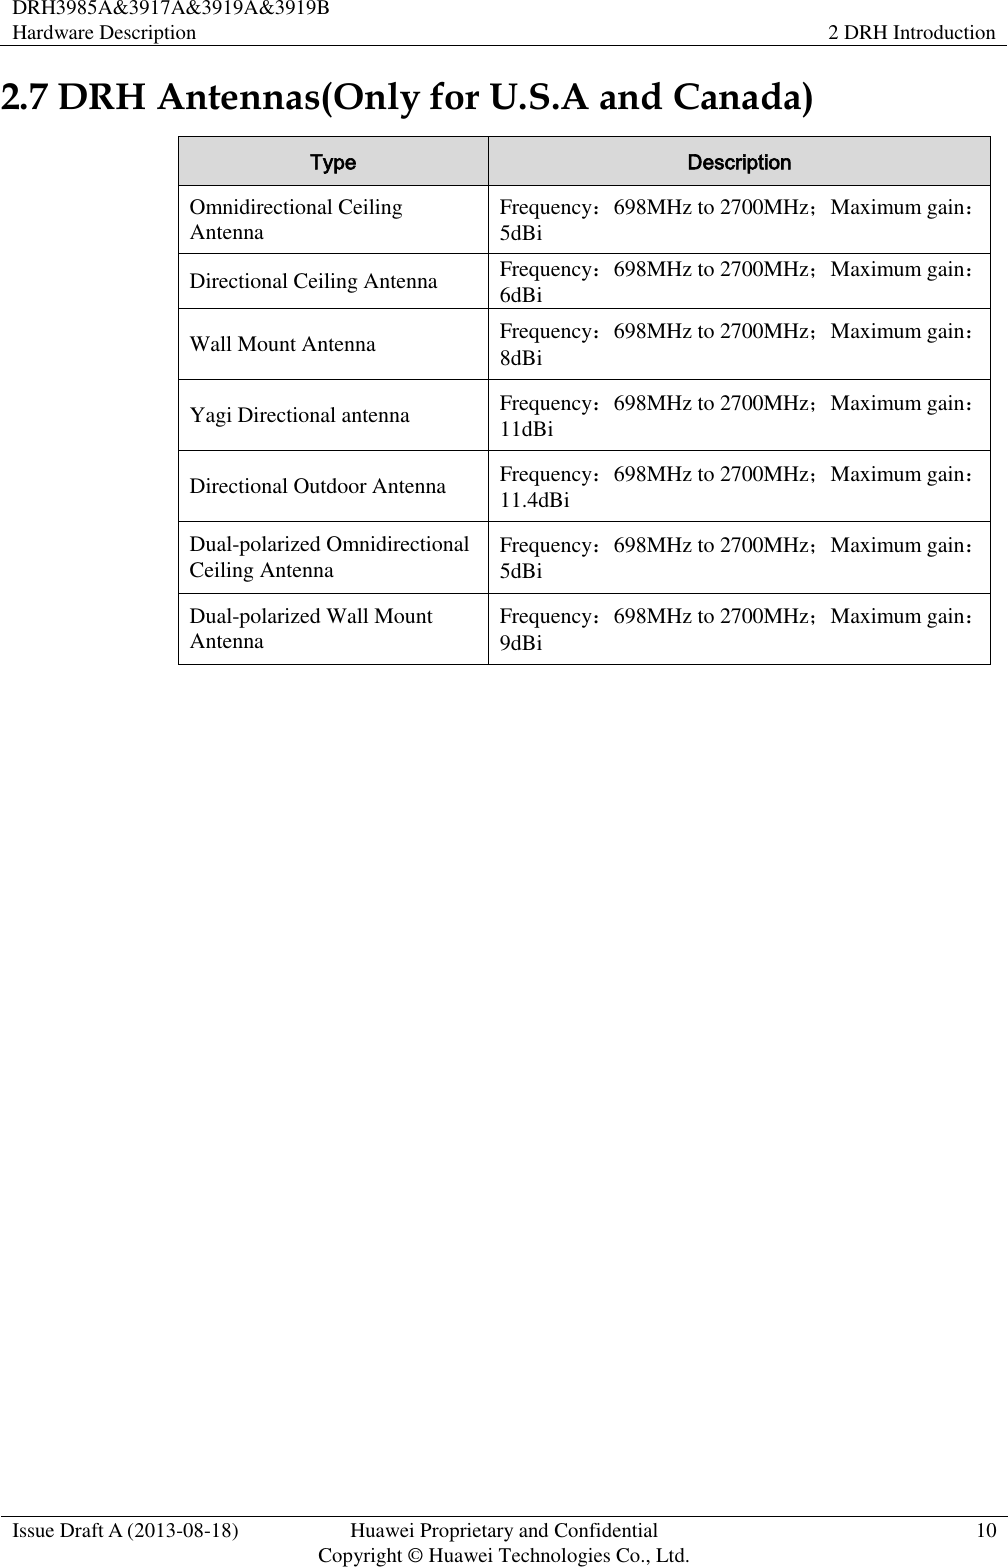 DRH3985A&amp;3917A&amp;3919A&amp;3919B Hardware Description 2 DRH Introduction  Issue Draft A (2013-08-18) Huawei Proprietary and Confidential                                     Copyright © Huawei Technologies Co., Ltd. 10  2.7 DRH Antennas(Only for U.S.A and Canada) Type Description Omnidirectional Ceiling Antenna Frequency：698MHz to 2700MHz；Maximum gain：5dBi Directional Ceiling Antenna Frequency：698MHz to 2700MHz；Maximum gain：6dBi Wall Mount Antenna Frequency：698MHz to 2700MHz；Maximum gain：8dBi Yagi Directional antenna Frequency：698MHz to 2700MHz；Maximum gain：11dBi Directional Outdoor Antenna Frequency：698MHz to 2700MHz；Maximum gain：11.4dBi Dual-polarized Omnidirectional Ceiling Antenna Frequency：698MHz to 2700MHz；Maximum gain：5dBi Dual-polarized Wall Mount Antenna Frequency：698MHz to 2700MHz；Maximum gain：9dBi  